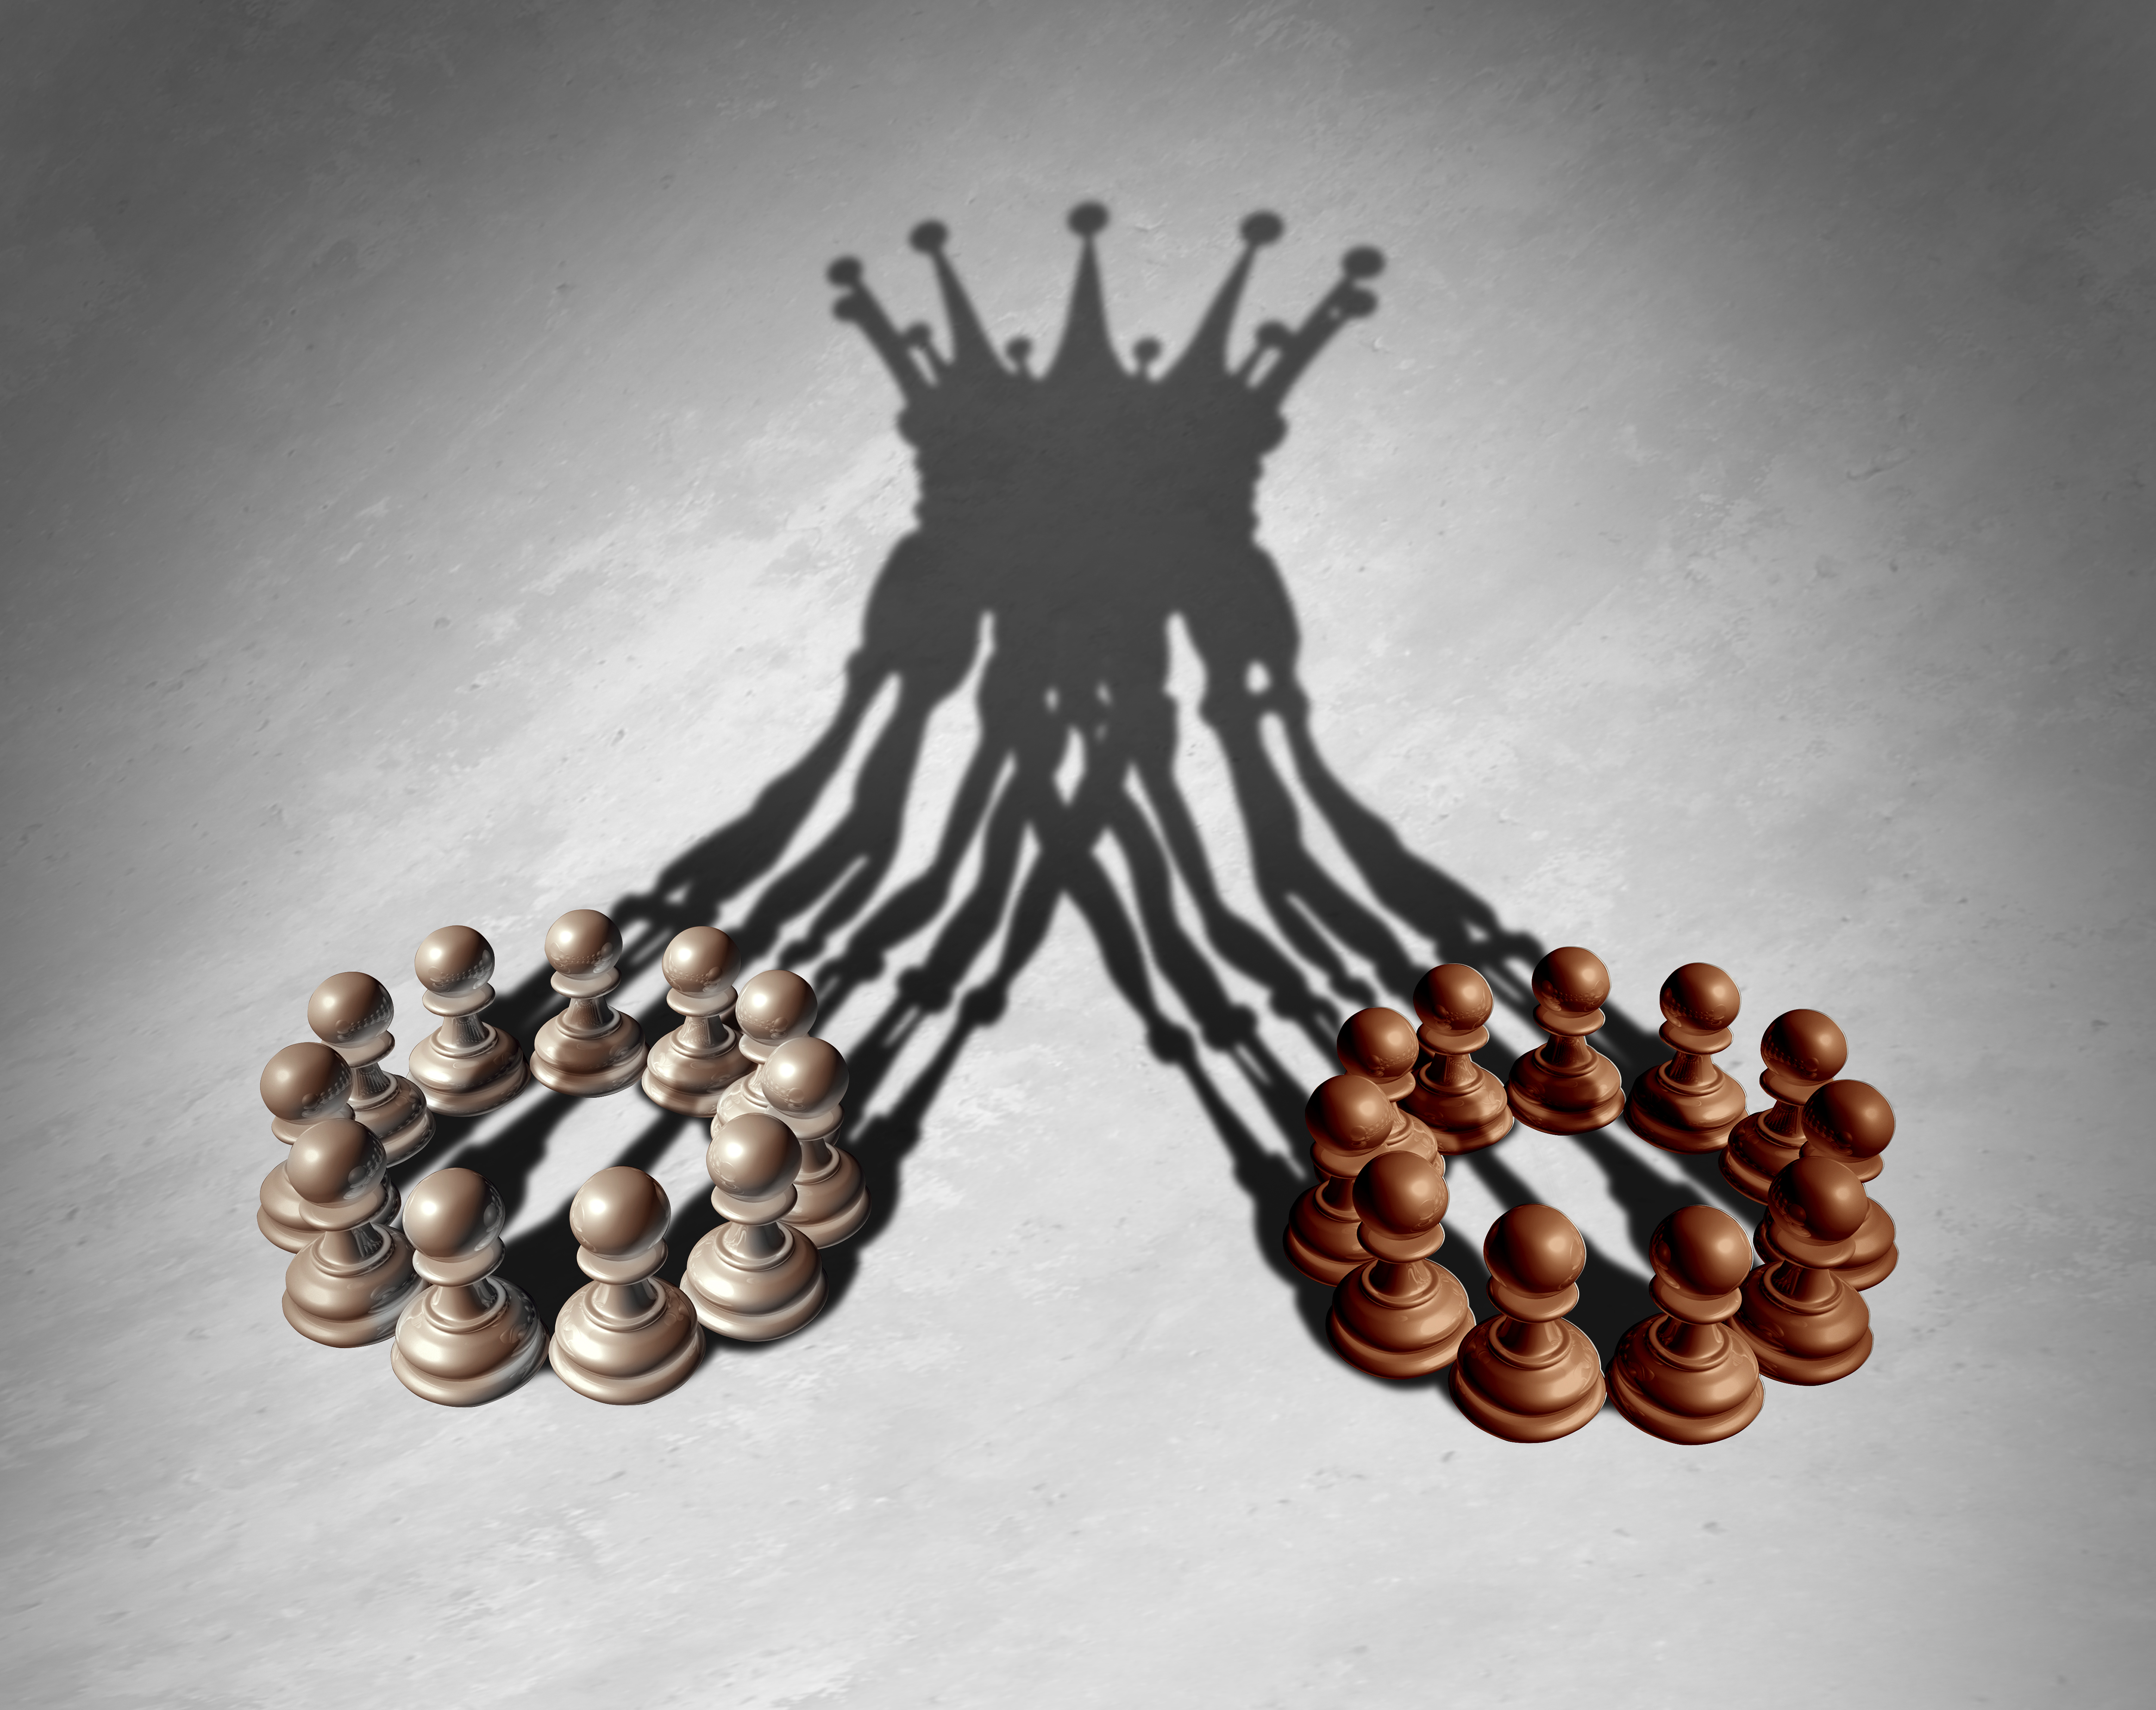 Image of chess pawns forming a king crown cast shadow to represent a merger.